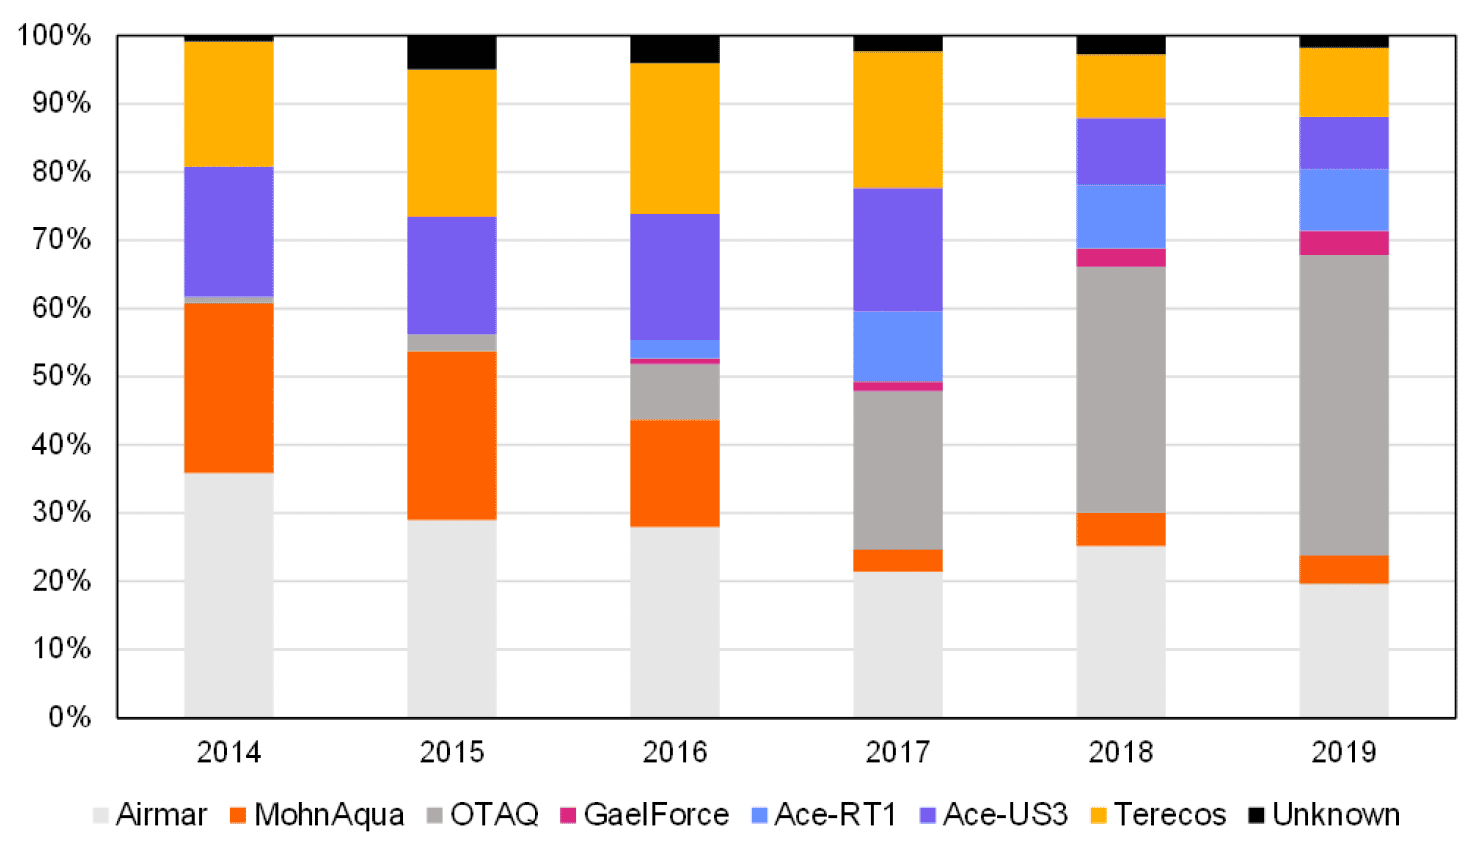 A chart showing the changes in the percentage of finfish farms using different types of ADD per year. In 2014, 2015 and 2016, Airmar was the most used ADD. In 2017, 2018 and 2019, OTAQ was the most used ADD.